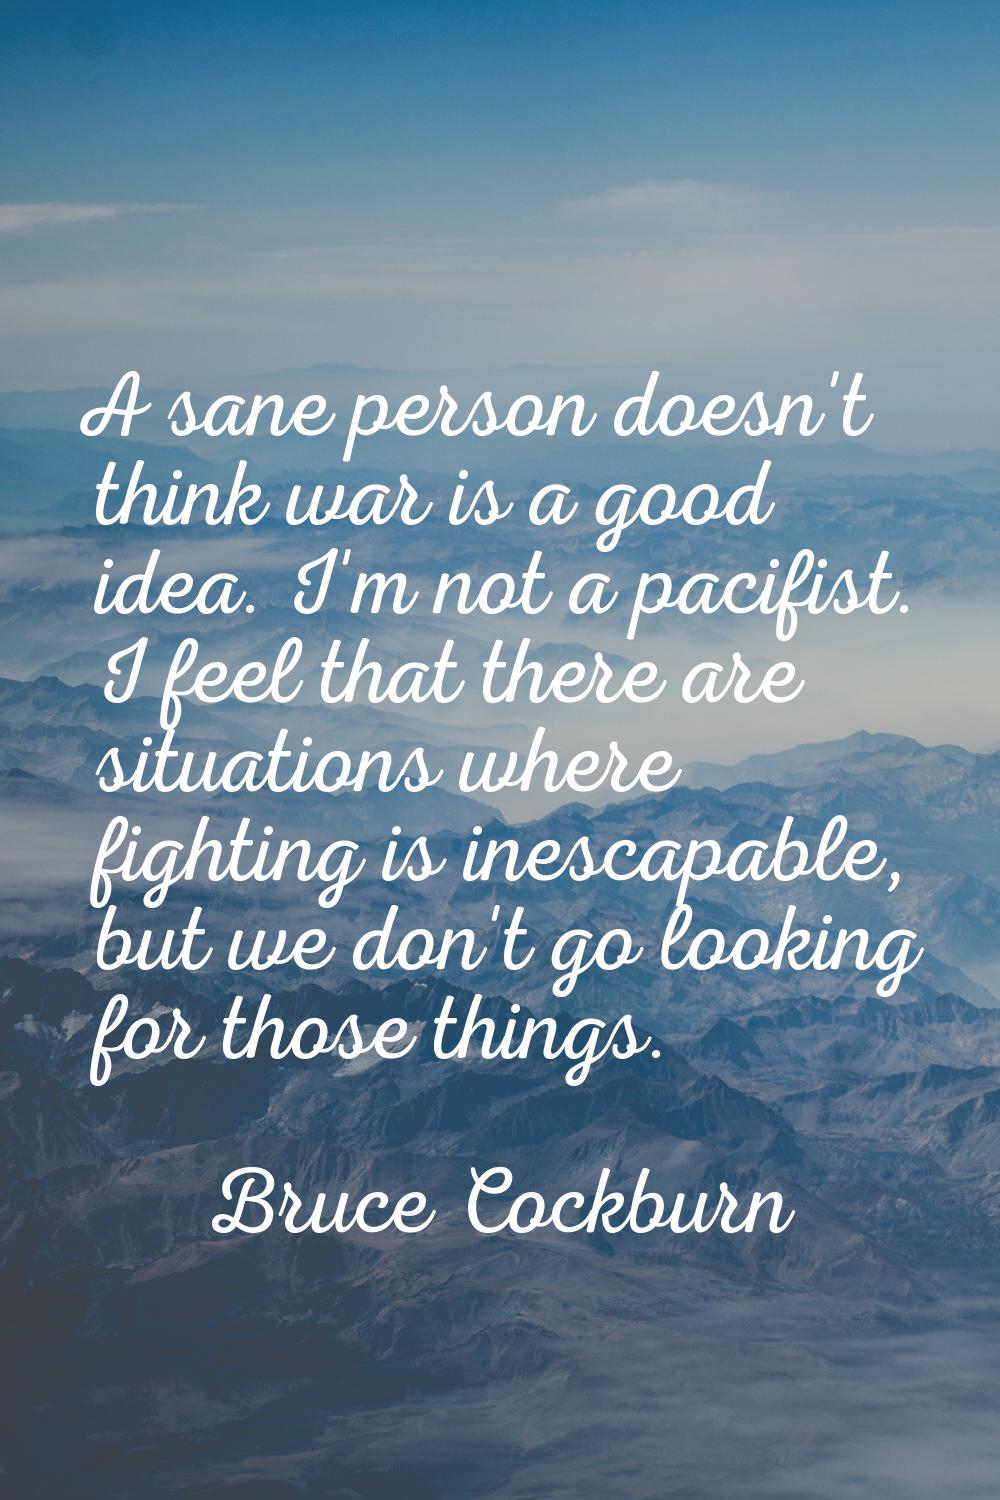 A sane person doesn't think war is a good idea. I'm not a pacifist. I feel that there are situation